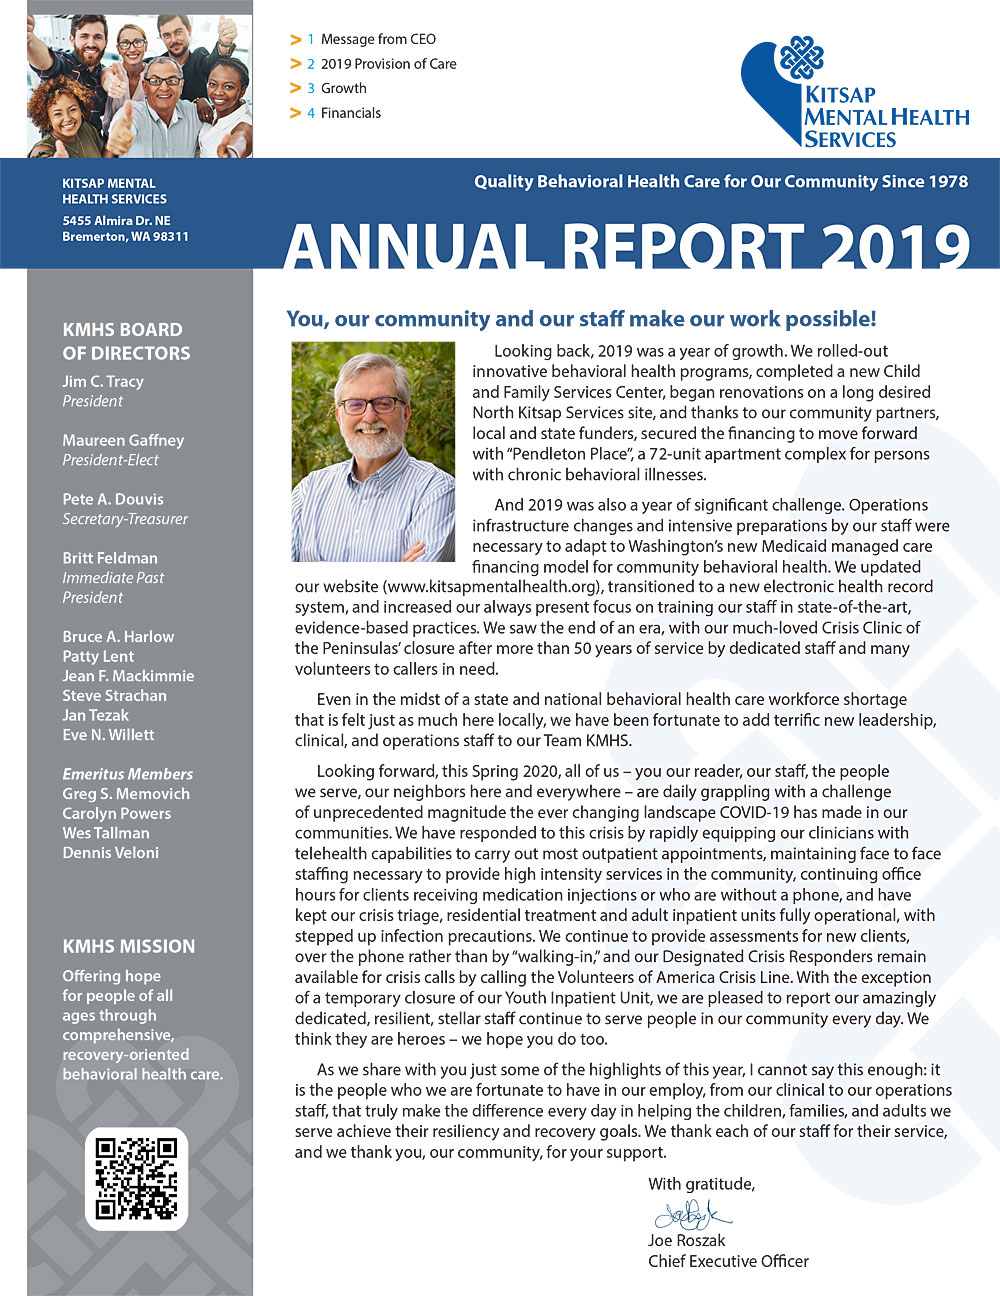 2019 KMHS Annual Report Cover